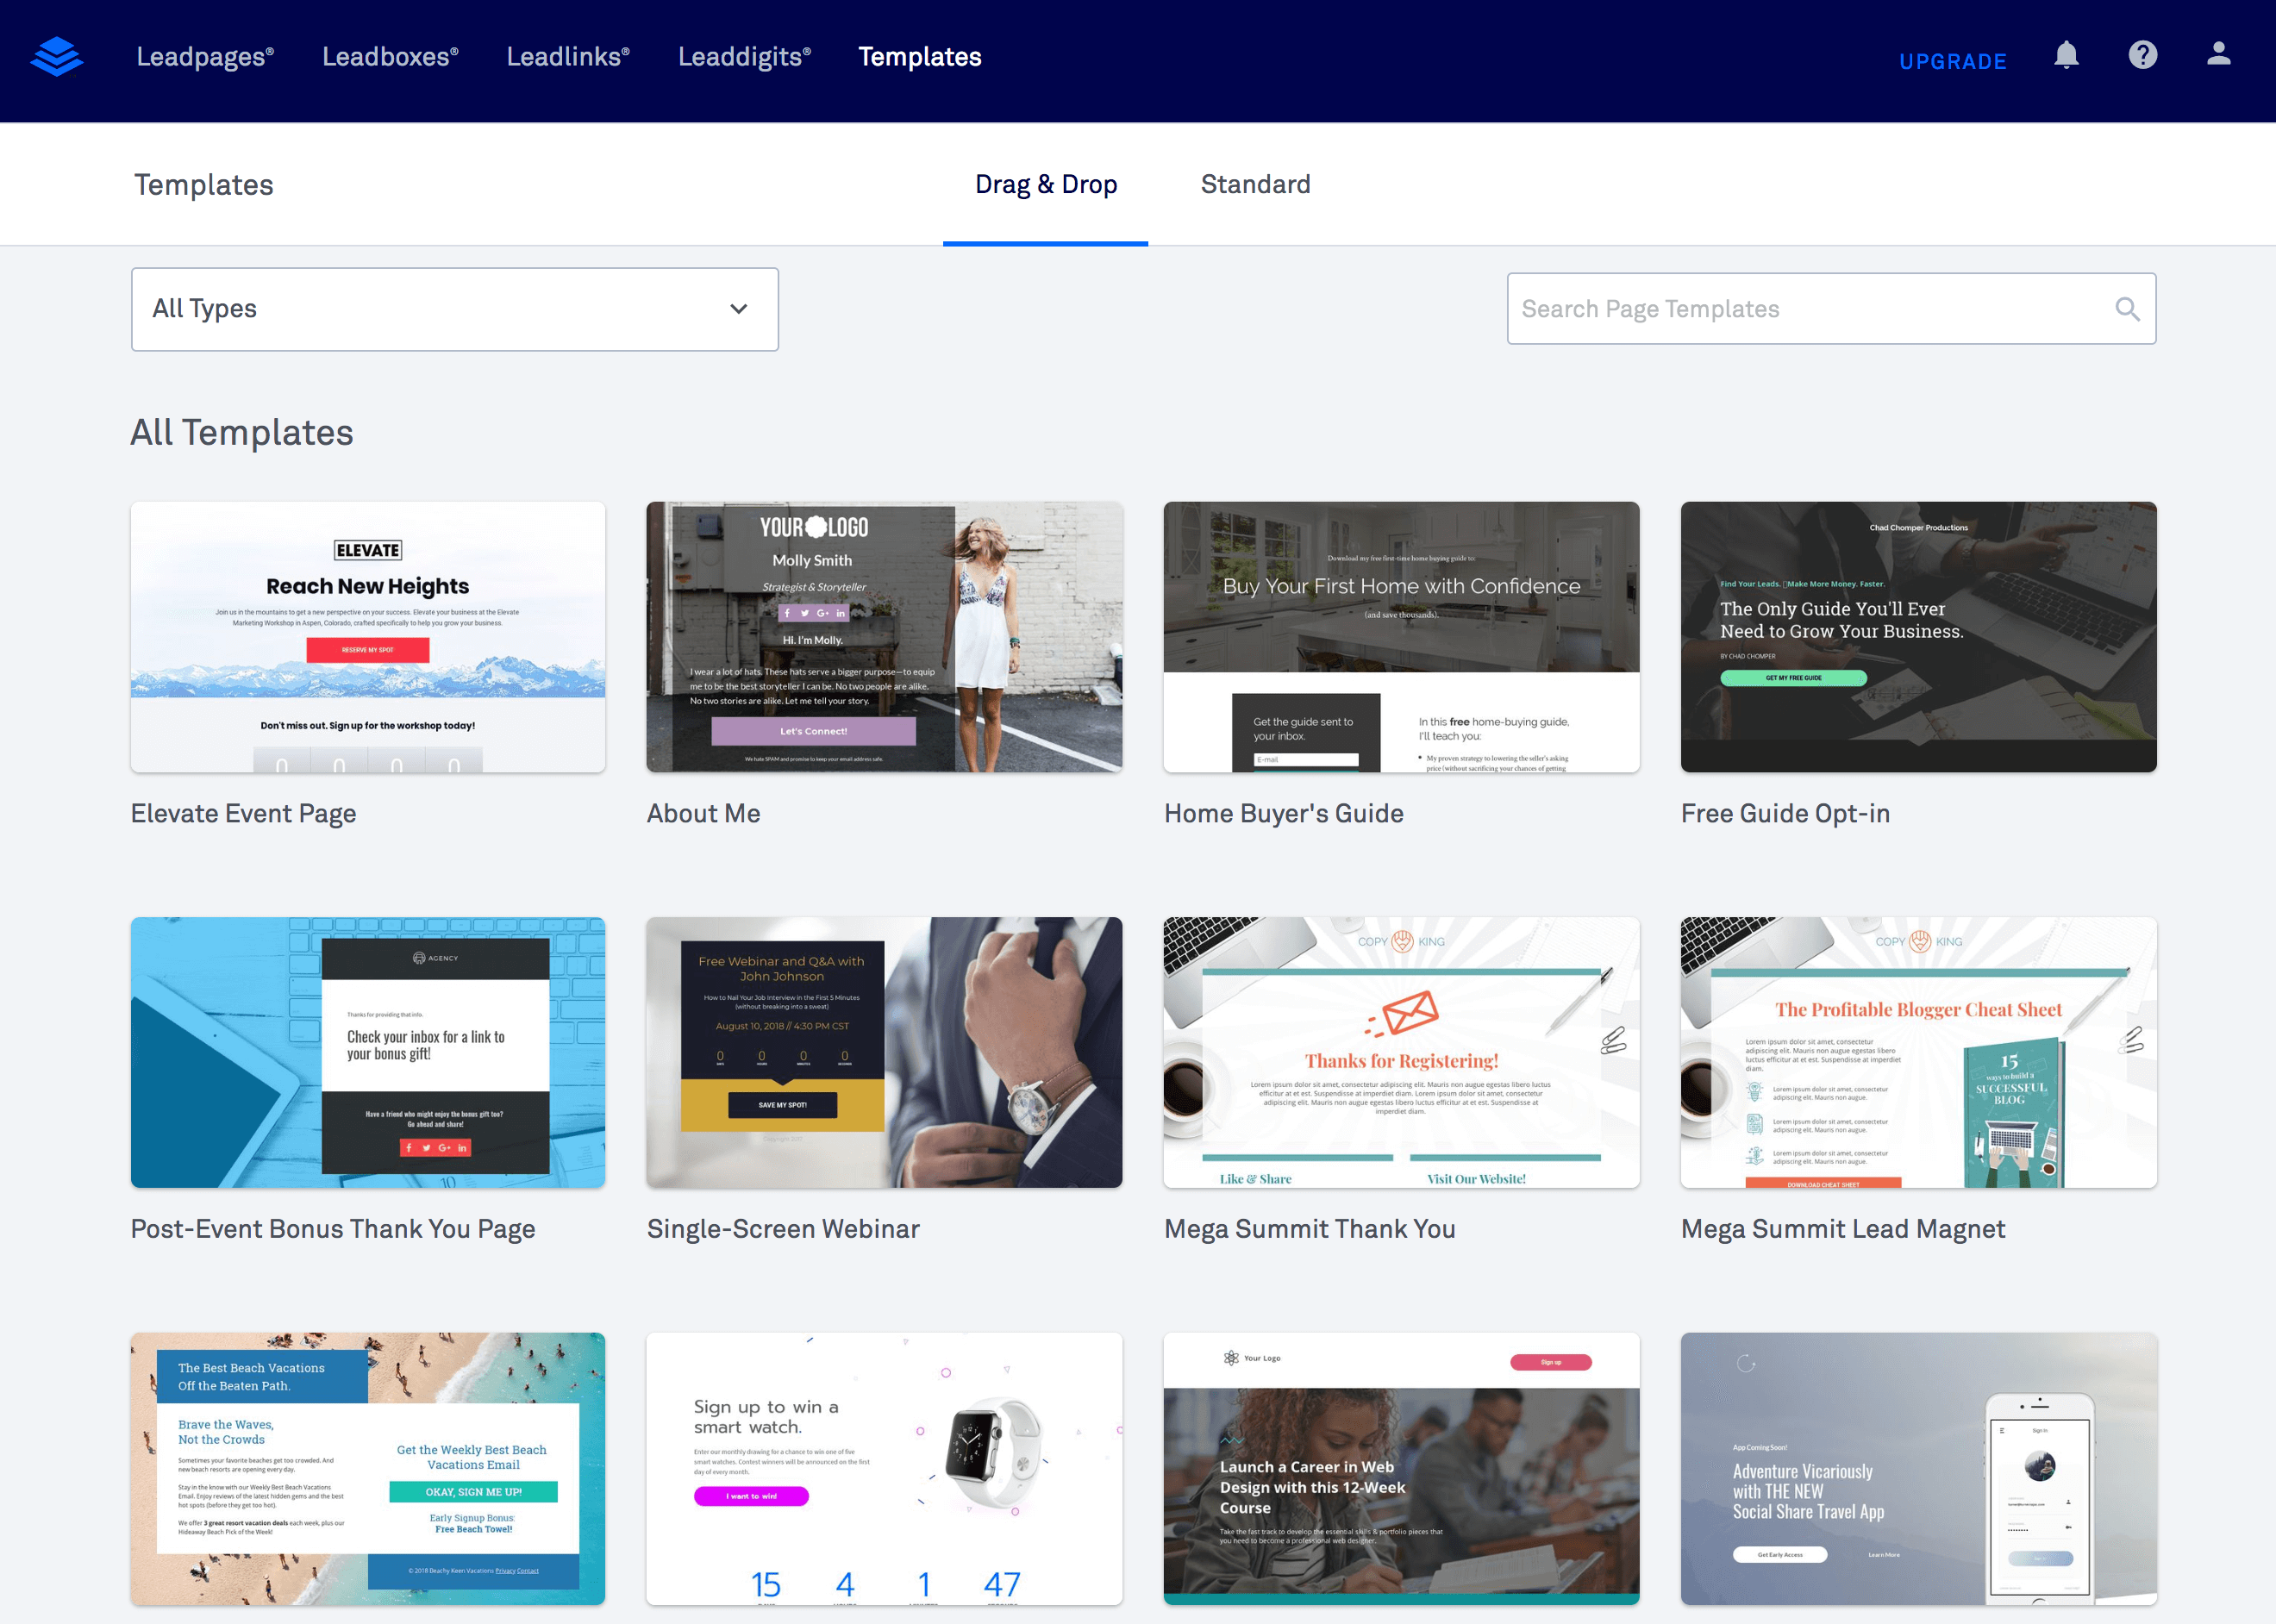 LeadPages 1